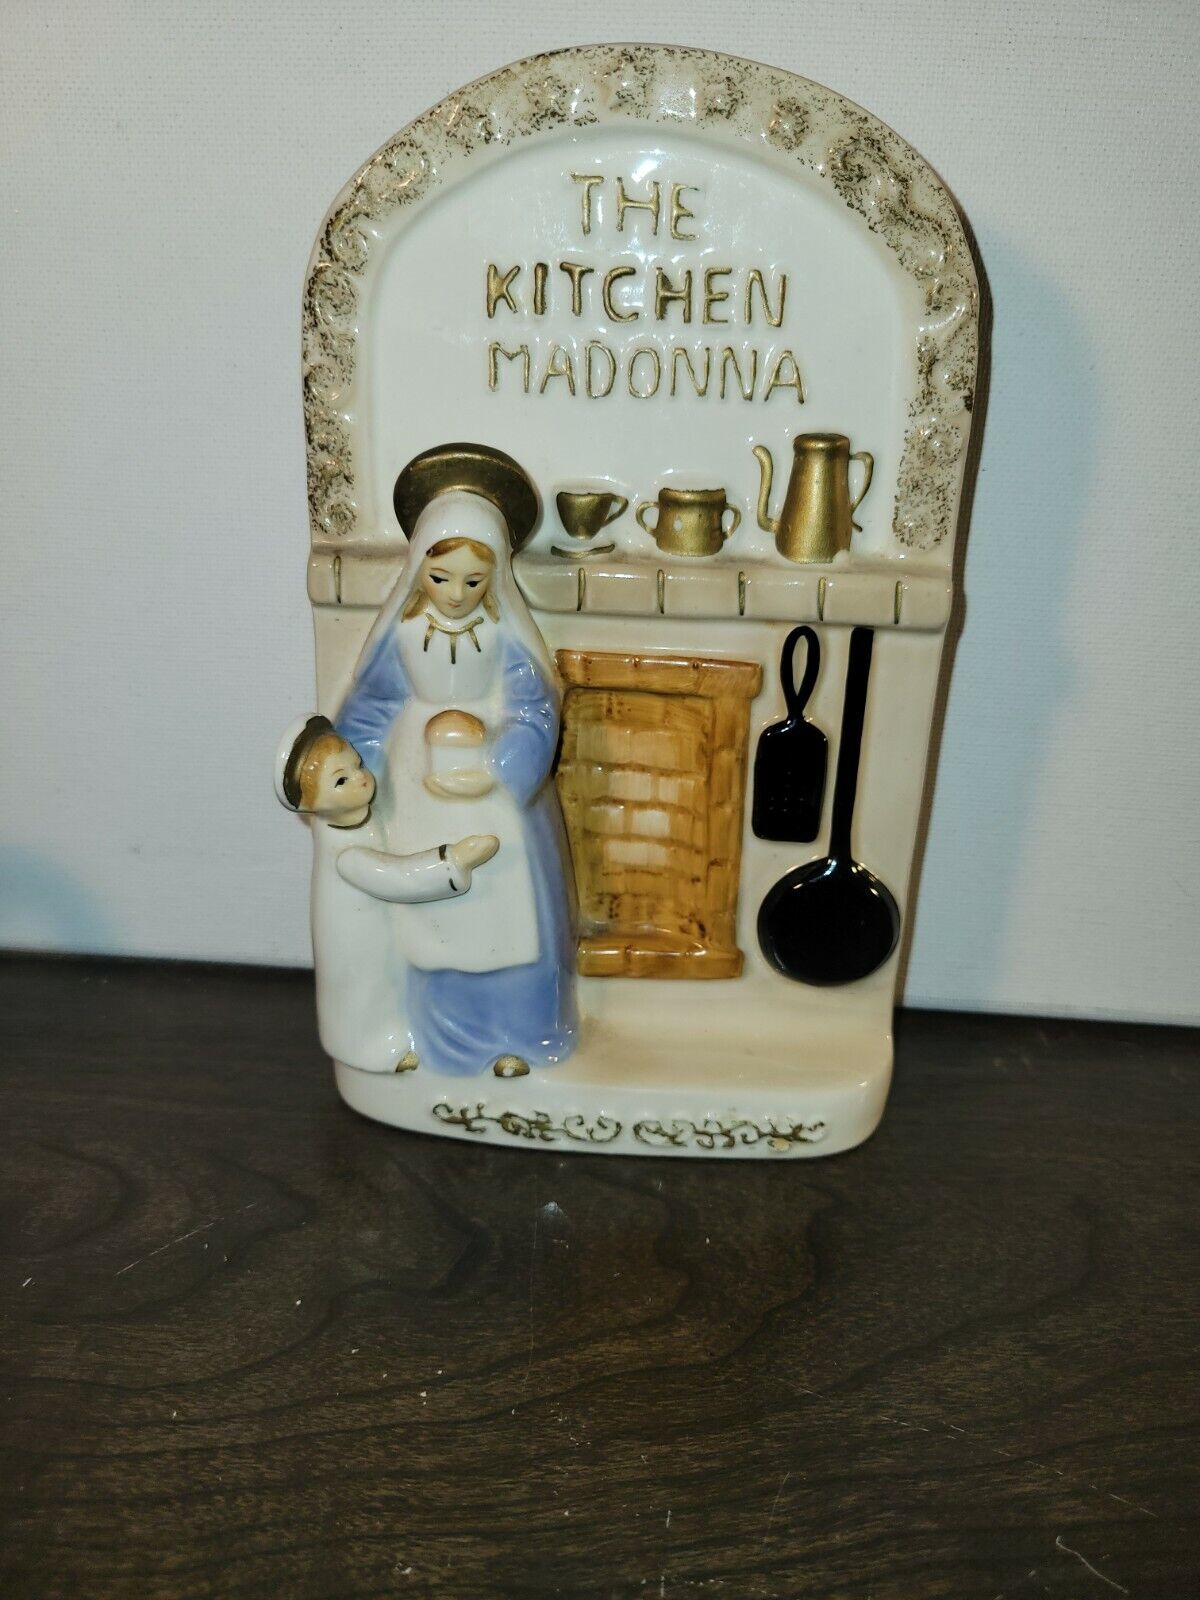 Vintage The Kitchen Madonna Ceramic Wall Plaque Fireplace Religious